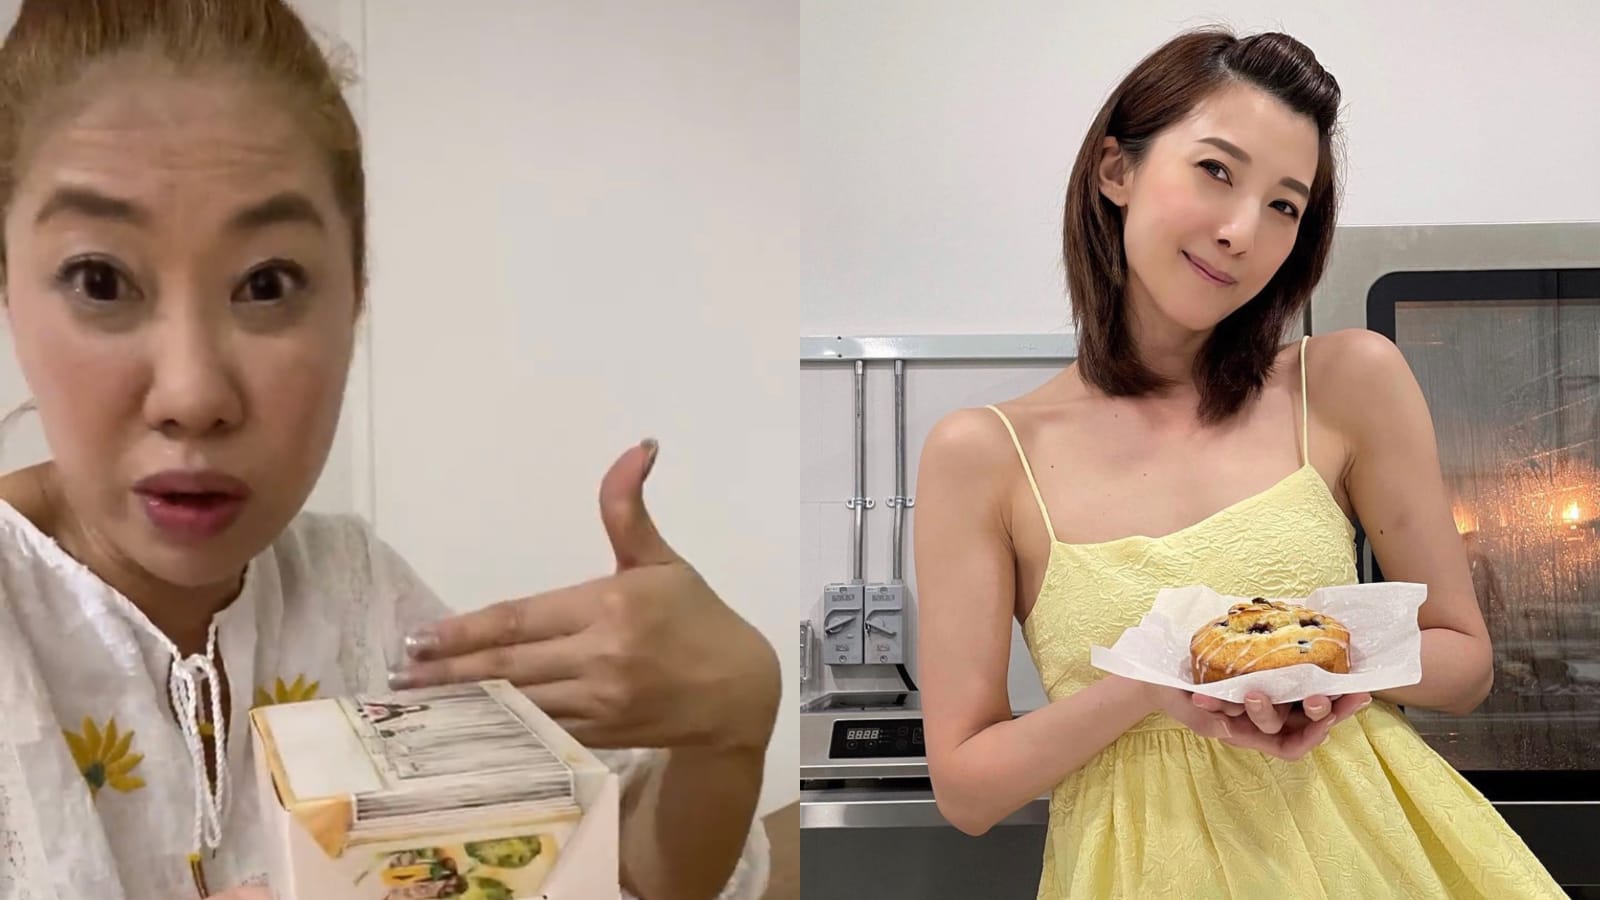 Pat Mok Says Jeanette Aw's Pastries Are Worth Their Price Tag In Video Review: "Jeanette Was Up Until 4am Making These!"